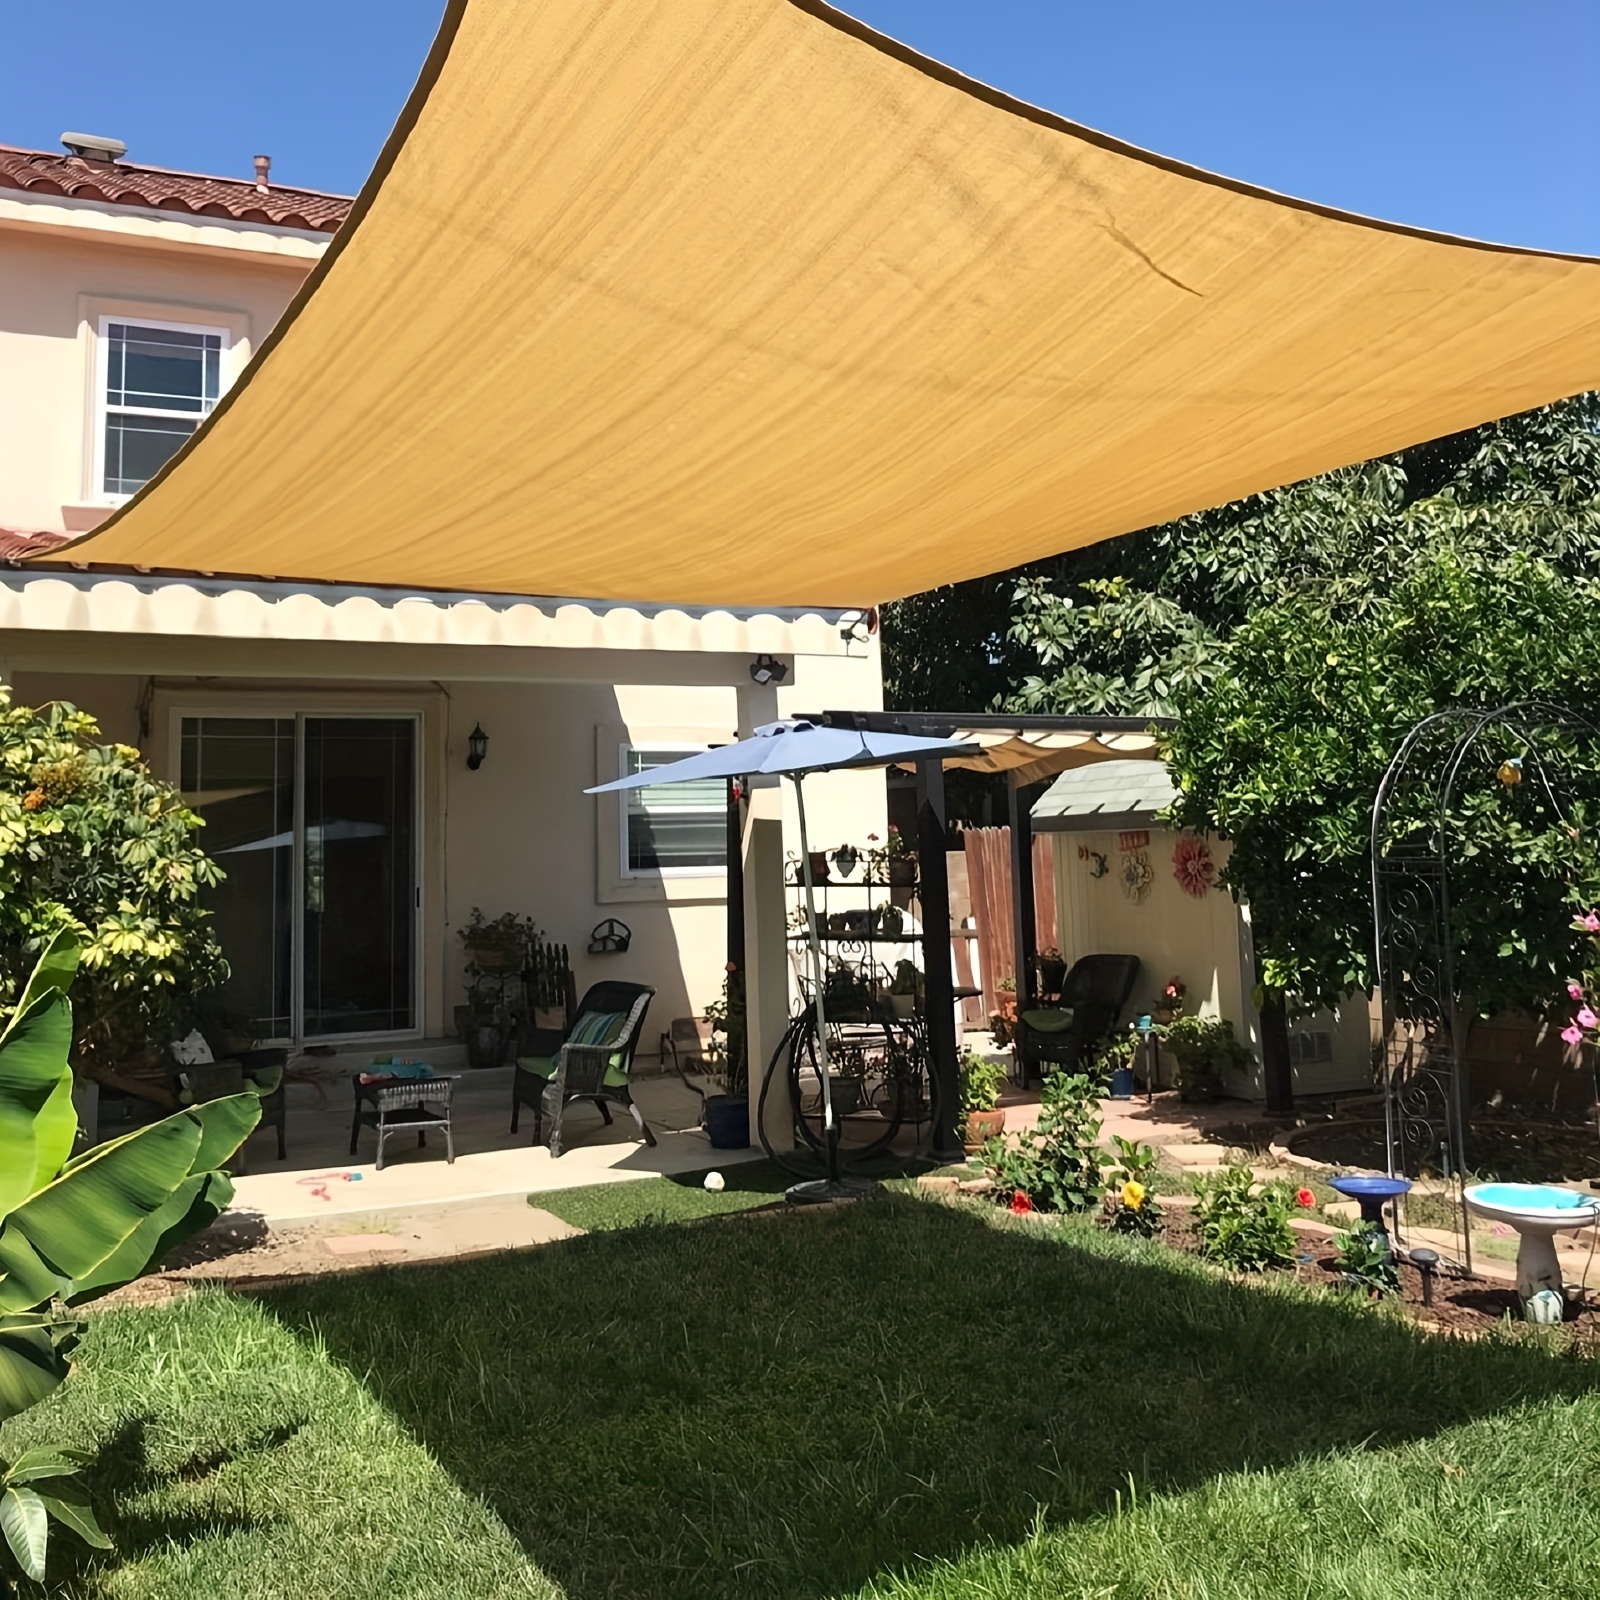 1pc Sun Shade Cloth Outdoor Shade * Pergola Shade Cover 80% Shade Fabric  Balcony Privacy Screen Fence Cover Sunblock With Grommets For Canopy Patio  Lawn Garden Porch Deck Barn Kennel Greenhouse